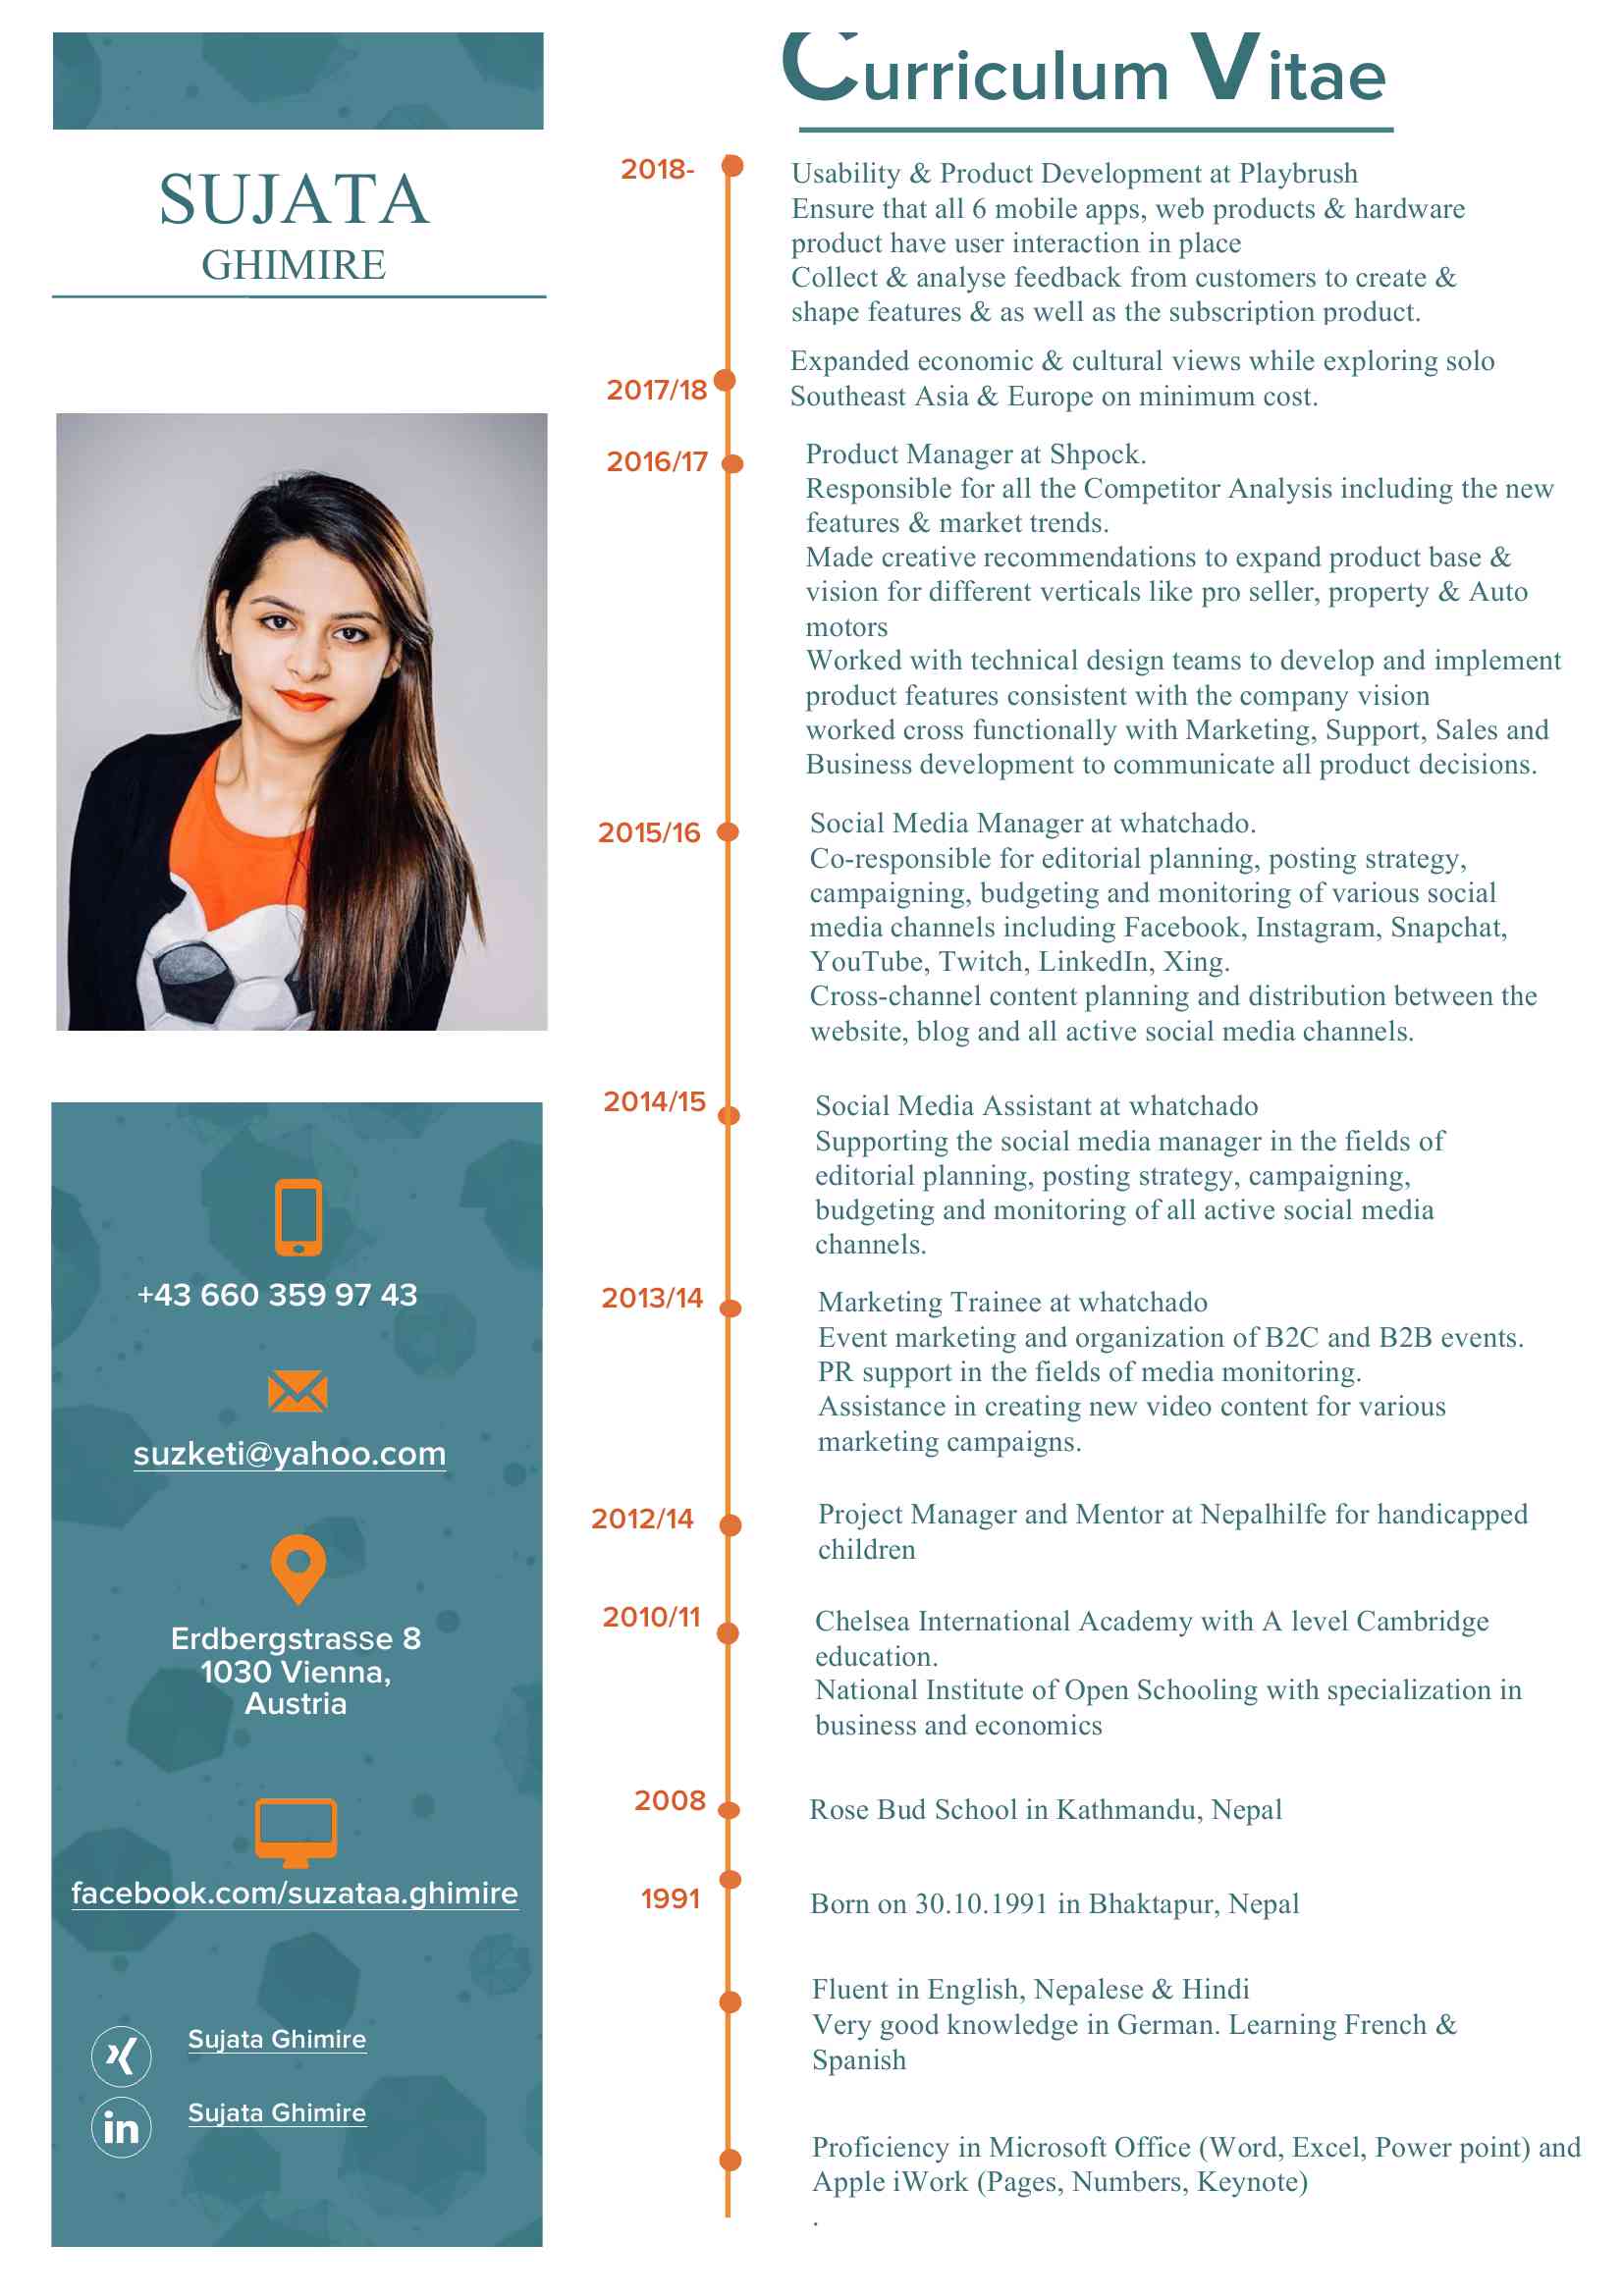 <BR>Microsoft Word - cv_sujataGhimire.docx<BR>Curriculum Vitae 2018- <BR>Usability & Product Development at Playbrush SUJATA <BR>Ensure that all 6 mobile apps, web products & hardware <BR>GHIMIRE <BR>product have user interaction in place <BR>Collect & analyse feedback from customers to create & <BR>shape features & as well as the subscription product. Expanded economic & cultural views while exploring solo <BR>2017/18 <BR>Southeast Asia & Europe on minimum cost. Product Manager at Shpock. <BR>2016/17 <BR>Responsible for all the Competitor Analysis including the new <BR>features & market trends. <BR>Made creative recommendations to expand product base & <BR>vision for different verticals like pro seller, property & Auto <BR>motors <BR>Worked with technical design teams to develop and implement <BR>product features consistent with the company vision <BR>worked cross functionally with Marketing, Support, Sales and <BR>Business development to communicate all product decisions. <BR>Social Media Manager at whatchado. <BR>2015/16 <BR>Co-responsible for editorial planning, posting strategy, <BR>campaigning, budgeting and monitoring of various social <BR>media channels including Facebook, Instagram, Snapchat, <BR>YouTube, Twitch, LinkedIn, Xing. <BR>Cross-channel content planning and distribution between the <BR>website, blog and all active social media channels. 2014/15 <BR>Social Media Assistant at whatchado <BR>Supporting the social media manager in the fields of <BR>editorial planning, posting strategy, campaigning, <BR>budgeting and monitoring of all active social media <BR>channels. <BR>+43 660 359 97 43 <BR>2013/14 <BR>Marketing Trainee at whatchado <BR>Event marketing and organization of B2C and B2B events. <BR>PR support in the fields of media monitoring. <BR>Assistance in creating new video content for various <BR>XXXX@XXXX.XXX<BR>marketing campaigns. 2012/14 <BR>Project Manager and Mentor at Nepalhilfe for handicapped <BR>children <BR>2010/11 <BR>Chelsea International Academy with A level Cambridge <BR>Erdbergstrasse 8 <BR>education. <BR>1030 Vienna, <BR>Austria<BR>National Institute of Open Schooling with specialization in business and economics <BR>2008 <BR>Rose Bud School in Kathmandu, Nepal <BR>facebook.com/suzataa.ghimire <BR>1991 <BR>Born on 30.10.1991 in Bhaktapur, Nepal <BR>Fluent in English, Nepalese & Hindi <BR>Very good knowledge in German. Learning French & <BR>Sujata Ghimire <BR>Spanish <BR>Sujata Ghimire Proficiency in Microsoft Office (Word, Excel, Power point) and <BR>Apple iWork (Pages, Numbers, Keynote) <BR>. COMPETENCES PRODUCT <BR>User Research and Testing: <BR>Good knowledge in on-field user testing including - website/app products and features via <BR>qualitative interviews & via app <BR>Design & implement cutomise regression testing for several mobile apps Metrics: <BR>Constant tracking of user behavior and flows in the product including -  <BR>quantitative analysis on Google Analytics and internal tracking tools Product Development: <BR>Able to define features and break down the task in to the user stories <BR>Wire framing & User flow for a new features <BR>Create user flow with the user personas. <BR>Good knowledge in the project management tool like Jira, Trello & Asana. Competitors Analysis: <BR>Up to date with market trends & competitors <BR>Able to take data driven decisions based on analytics, user testing, market research & <BR>competitor analysis MARKETING <BR> Social Media Marketing: <BR> - Managing and coordinating several social media channels on a B2C and B2B level, <BR>including Facebook, Instagram, Snapchat, Twitter, LinkedIn and Xing.  <BR>- The set up of cross-channel editorial plans on a monthly basis <BR>- The set up and constant monitoring of cross-channel ad campaigns, including A/B <BR>testings and optimization analysis <BR>- Constant researching on the latest marketing and social media trends  Content Marketing: <BR>- Support in creating user oriented content, including images, videos and texts (English) <BR>for various marketing campaigns <BR>- Constant performance monitoring and analysis of content within marketing <BR>campaigns, including website and social media content <BR>- Good knowledge in design tools such as Photoshop, Canva . Interests 